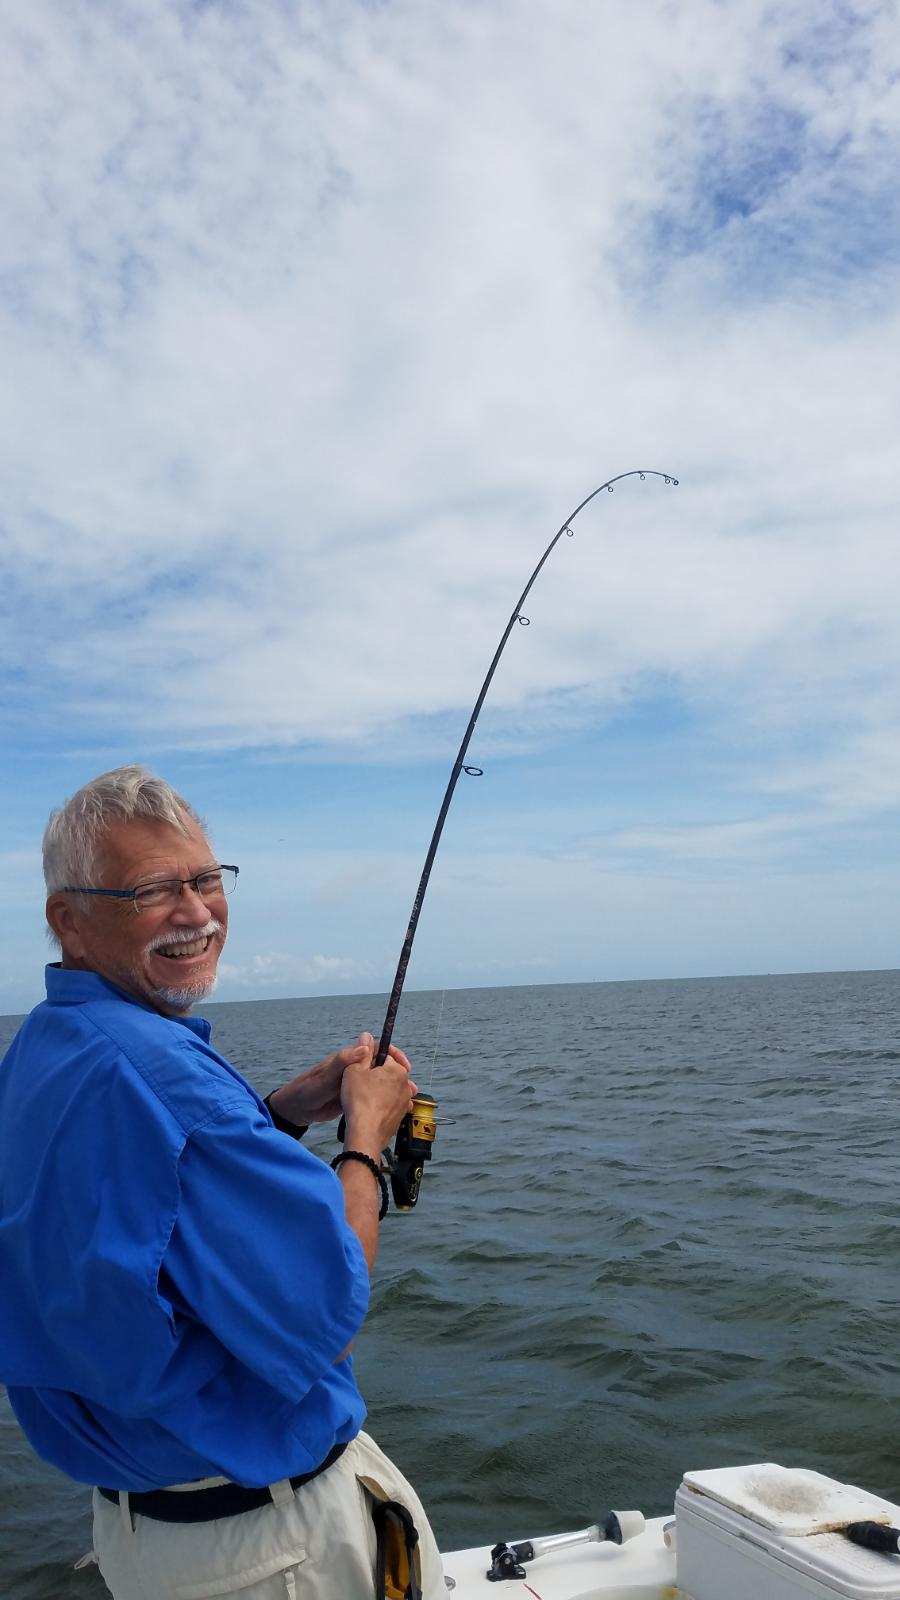 Speck-Tackler Fishing Teach's Lair Hatteras Inshore Charters